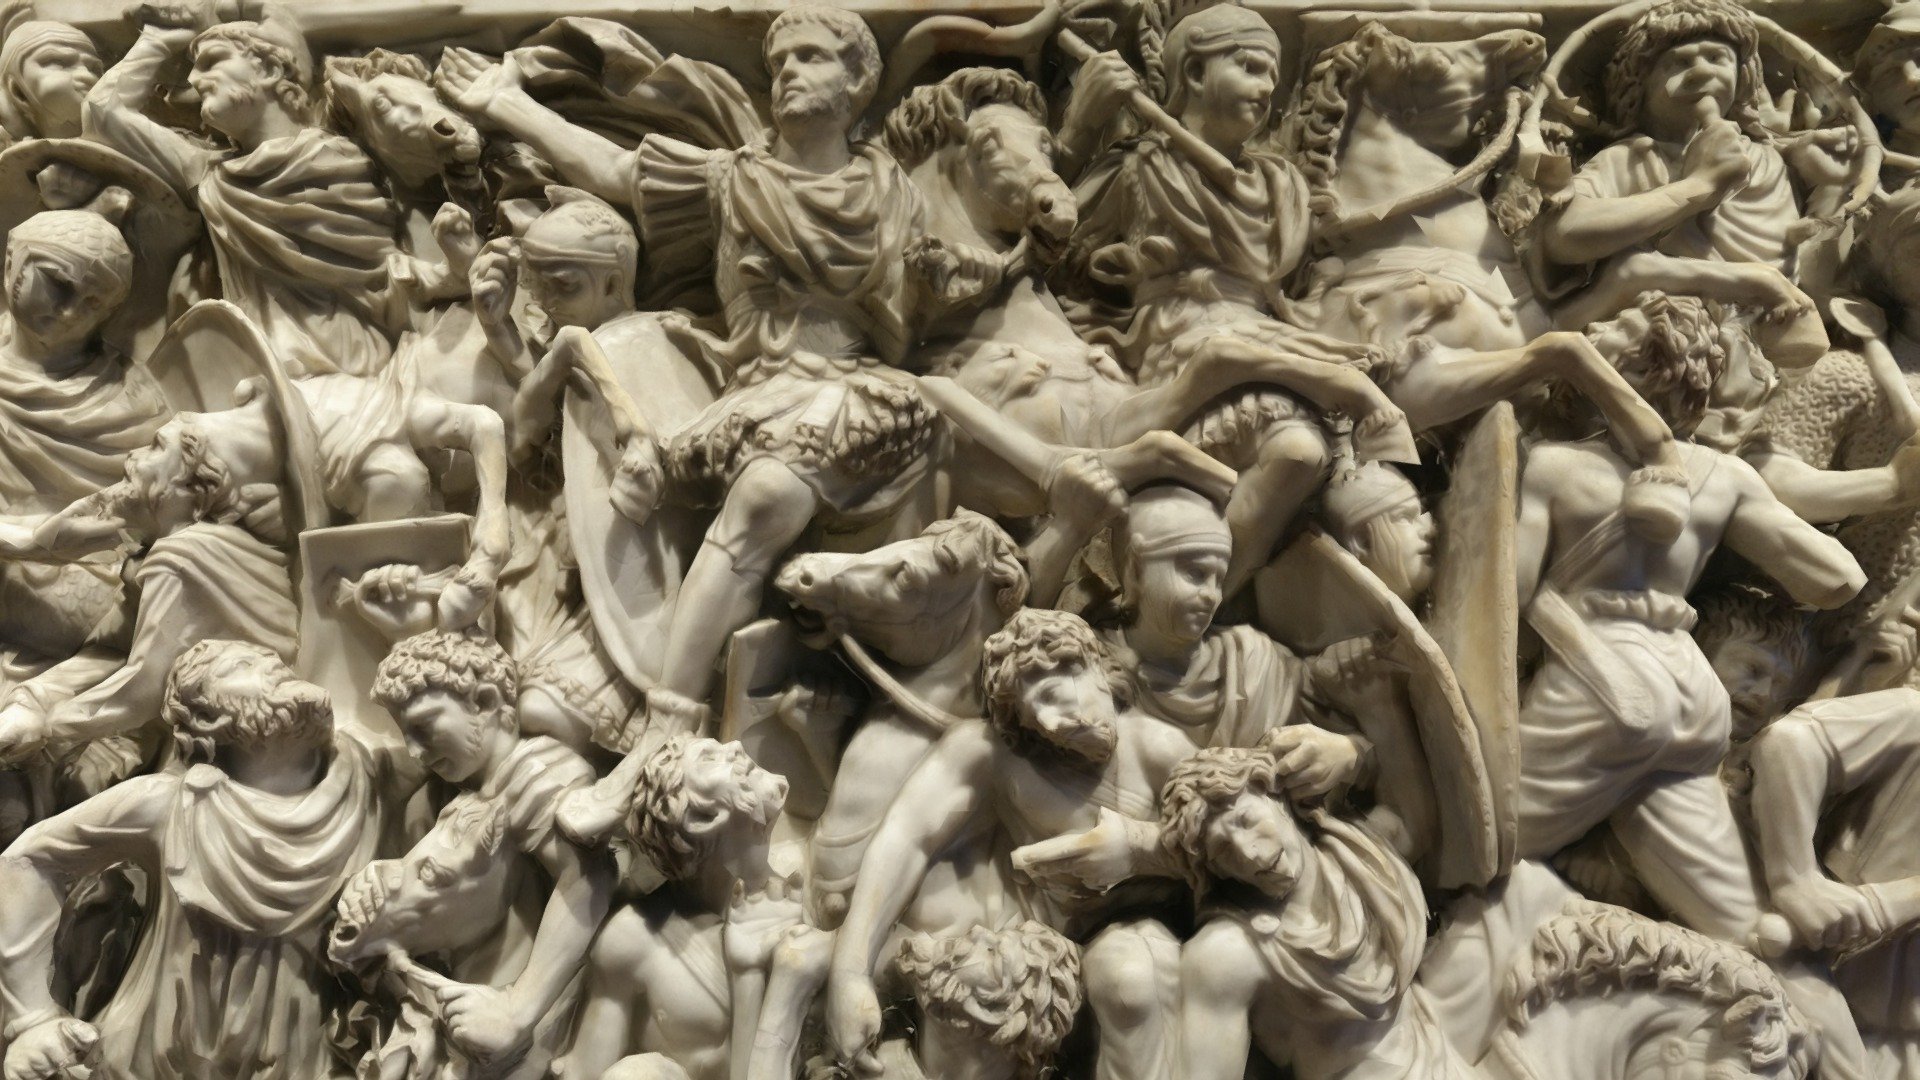 Ludovisi Battle Sarcophagus detail, Rome (Italy)